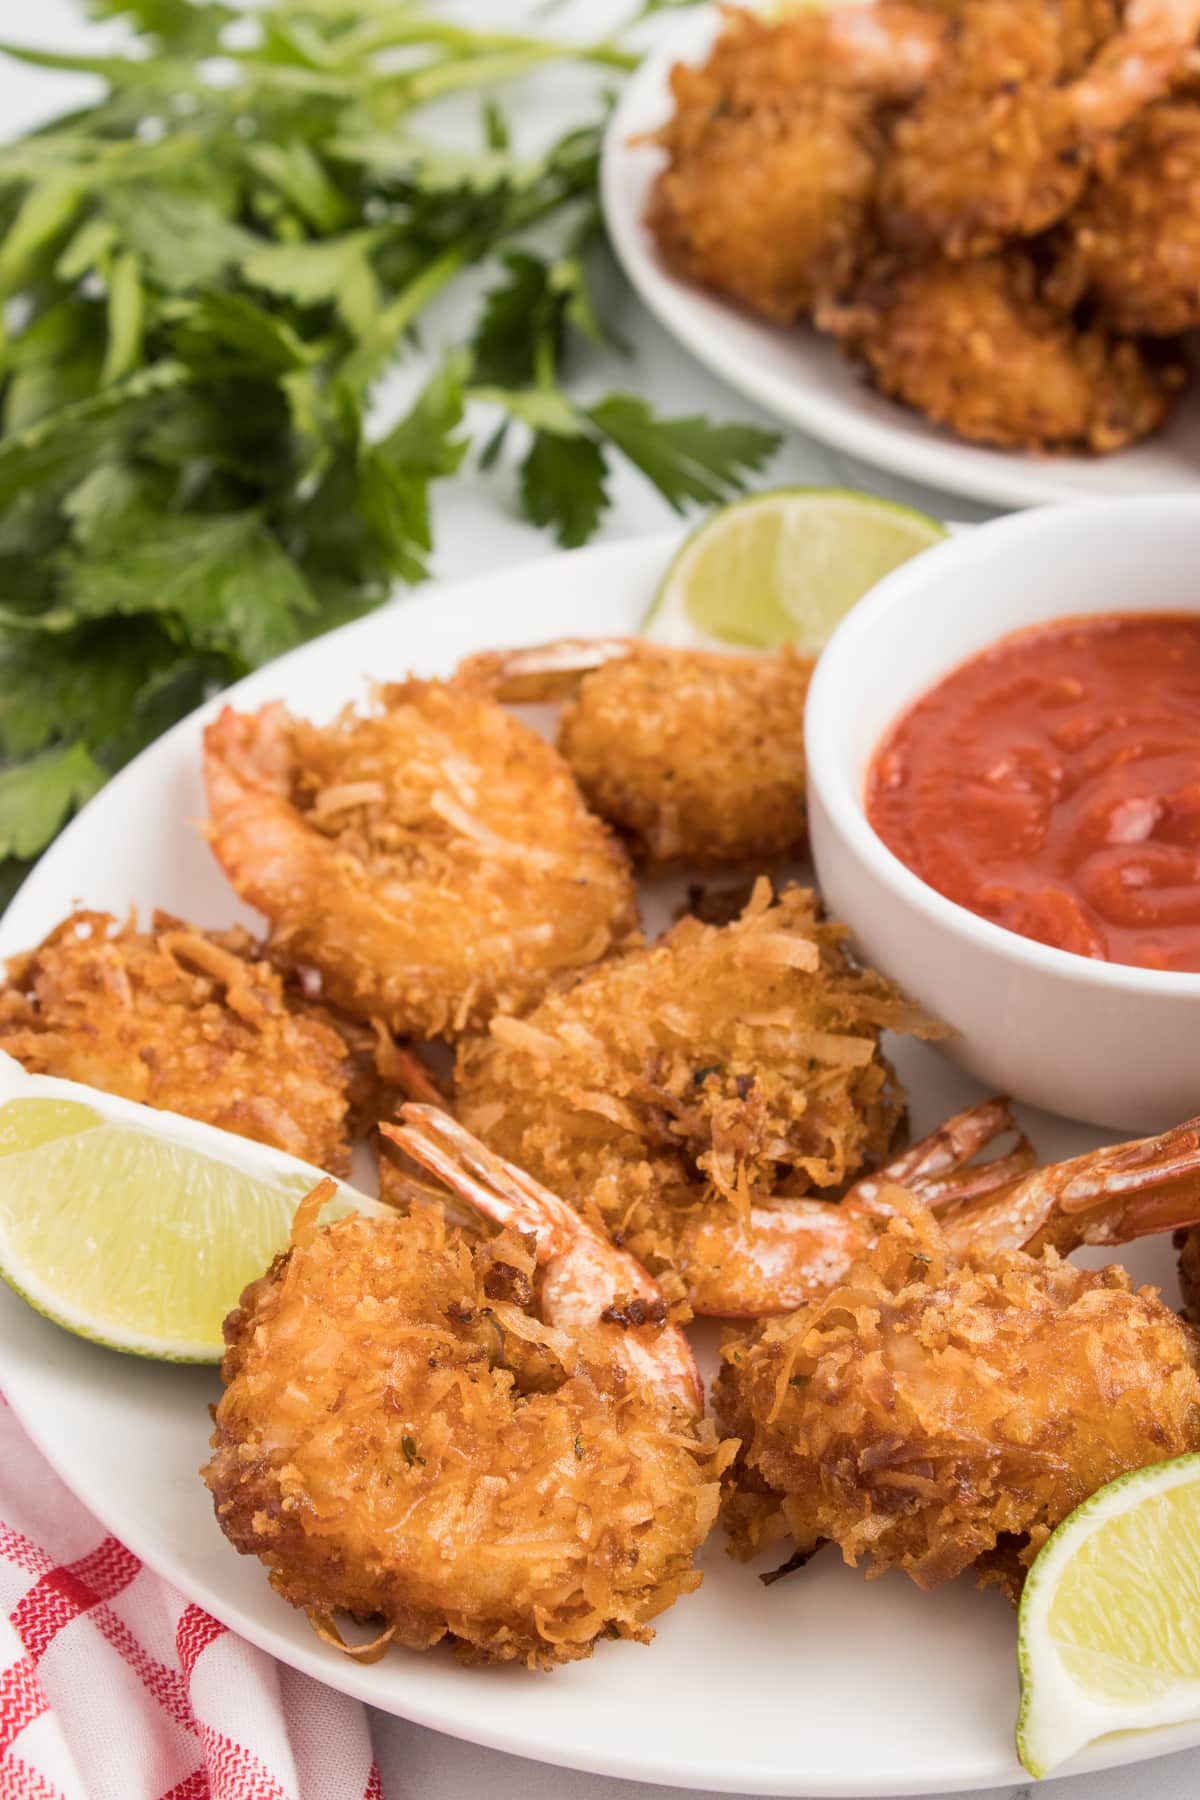 Angled overhead view of a plate of coconut shrimp with a bowl of sauce